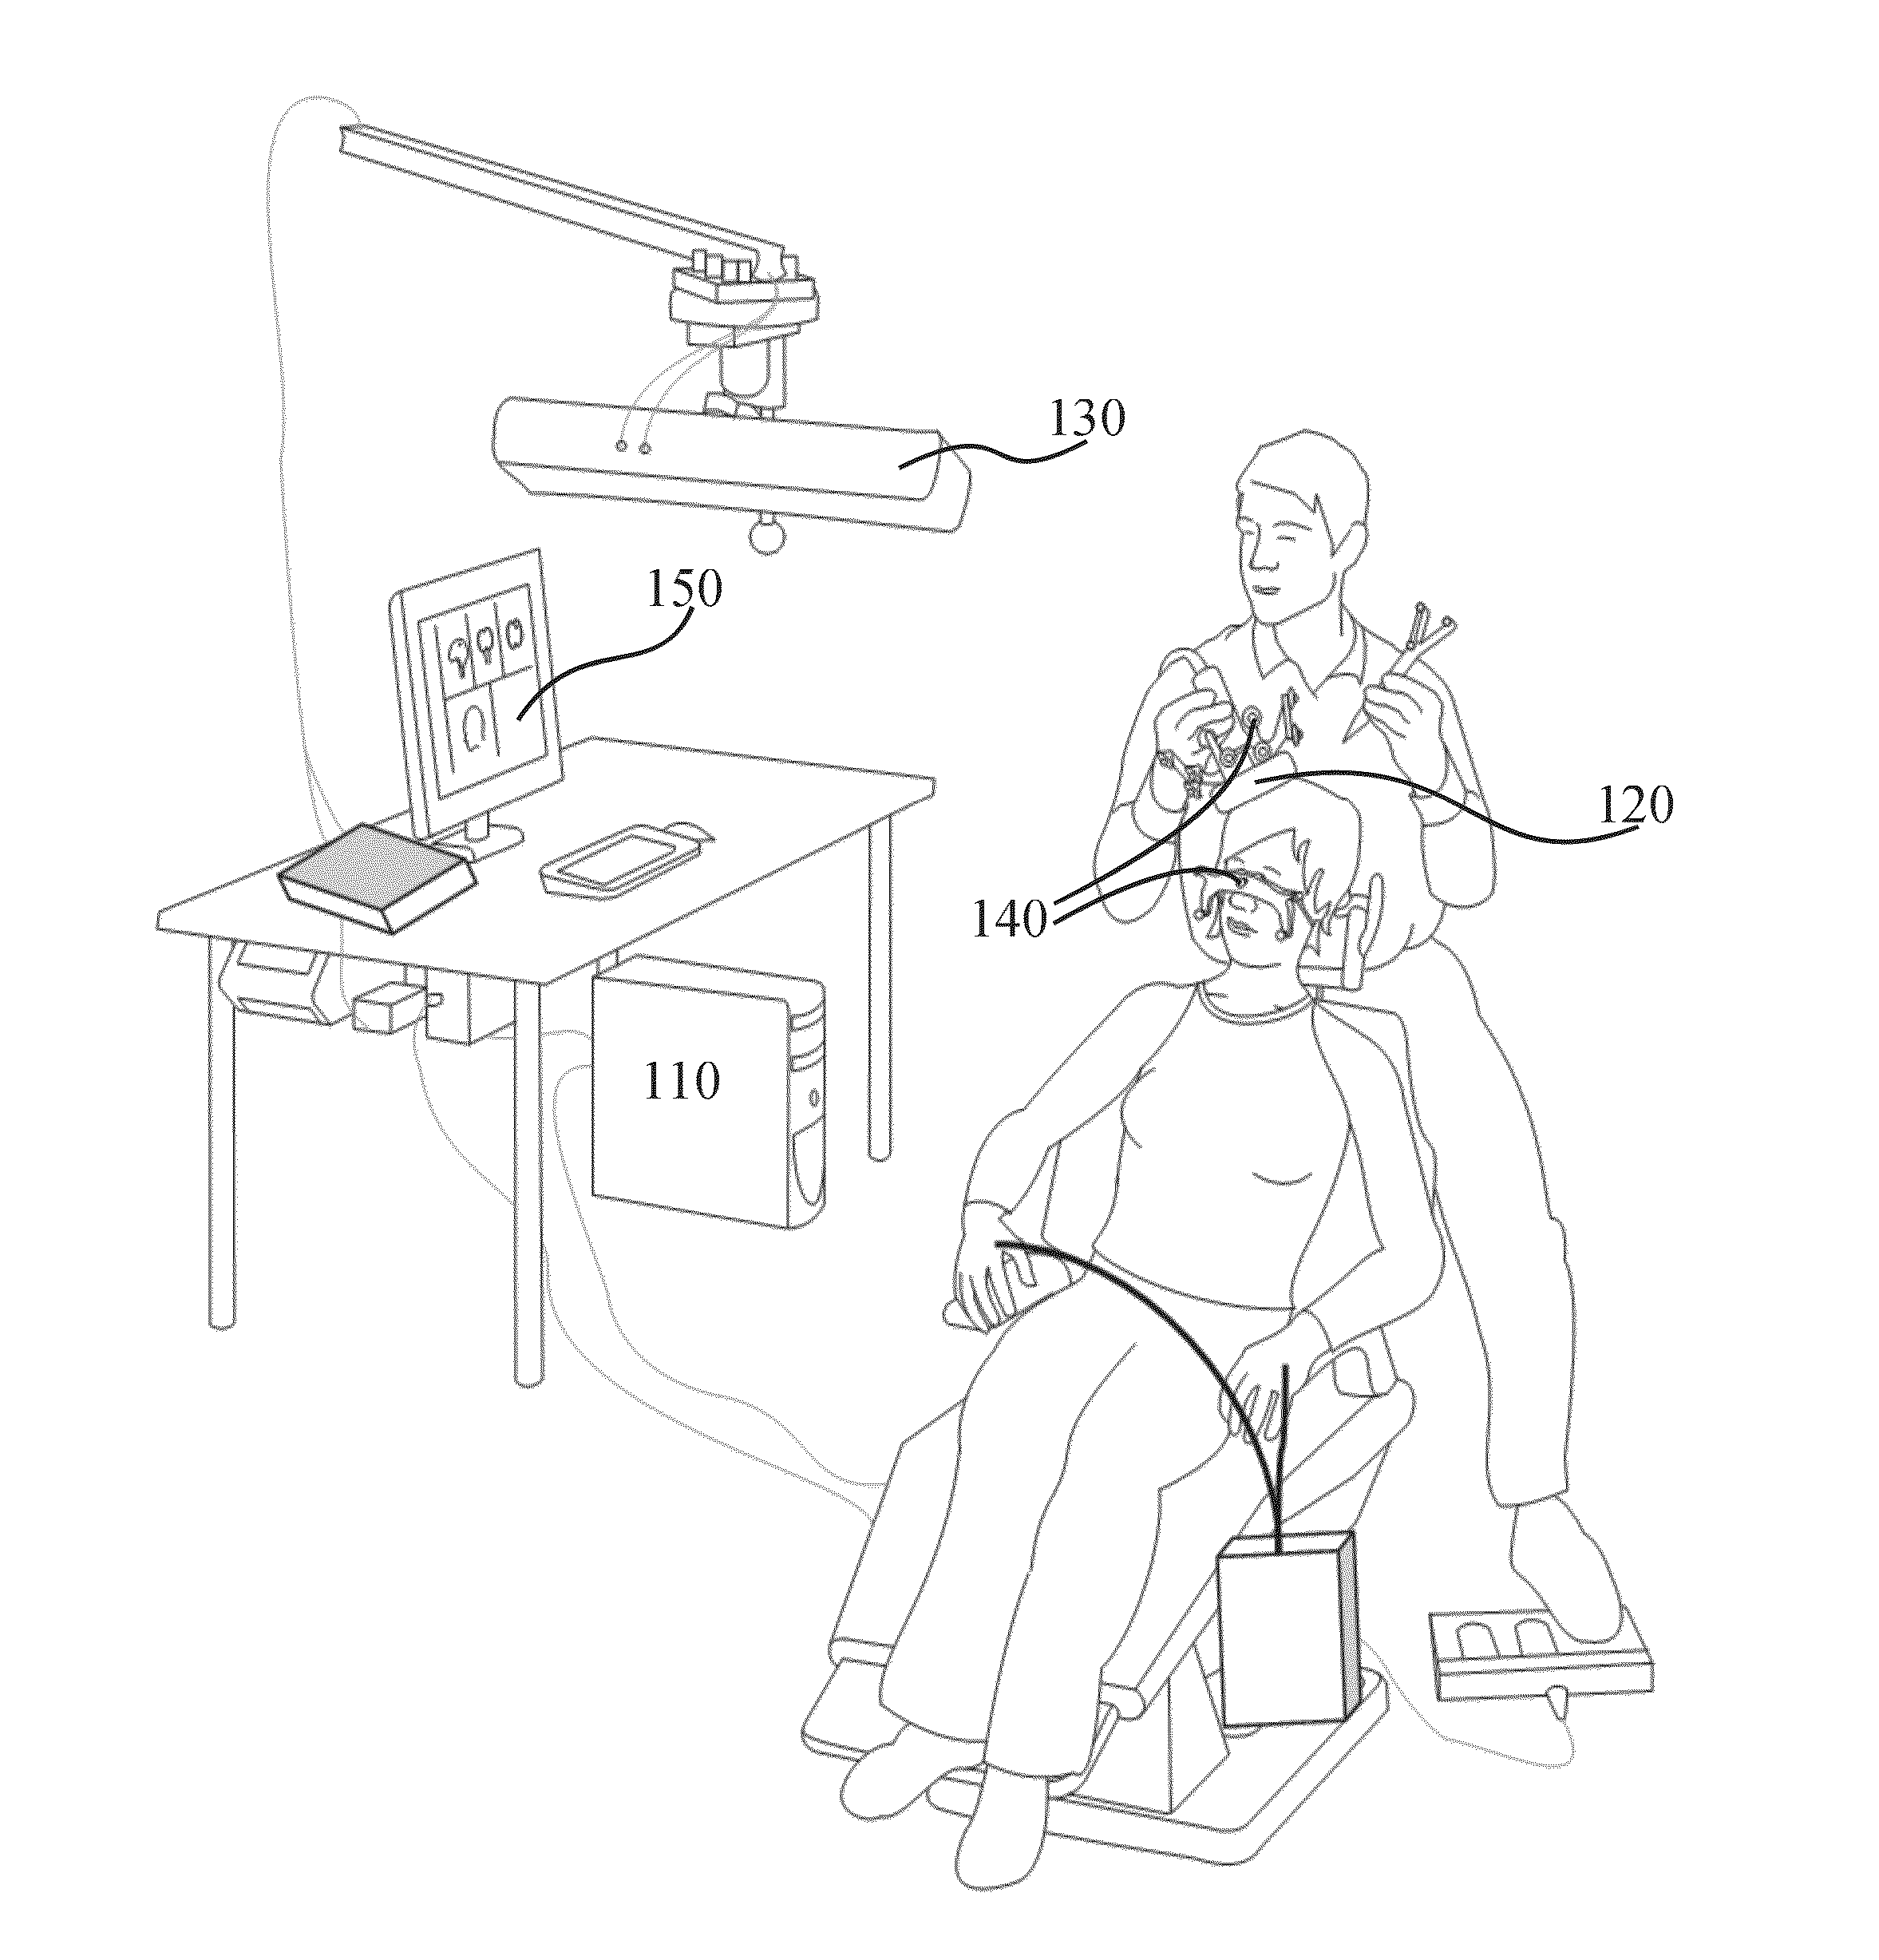 Position-finding apparatus